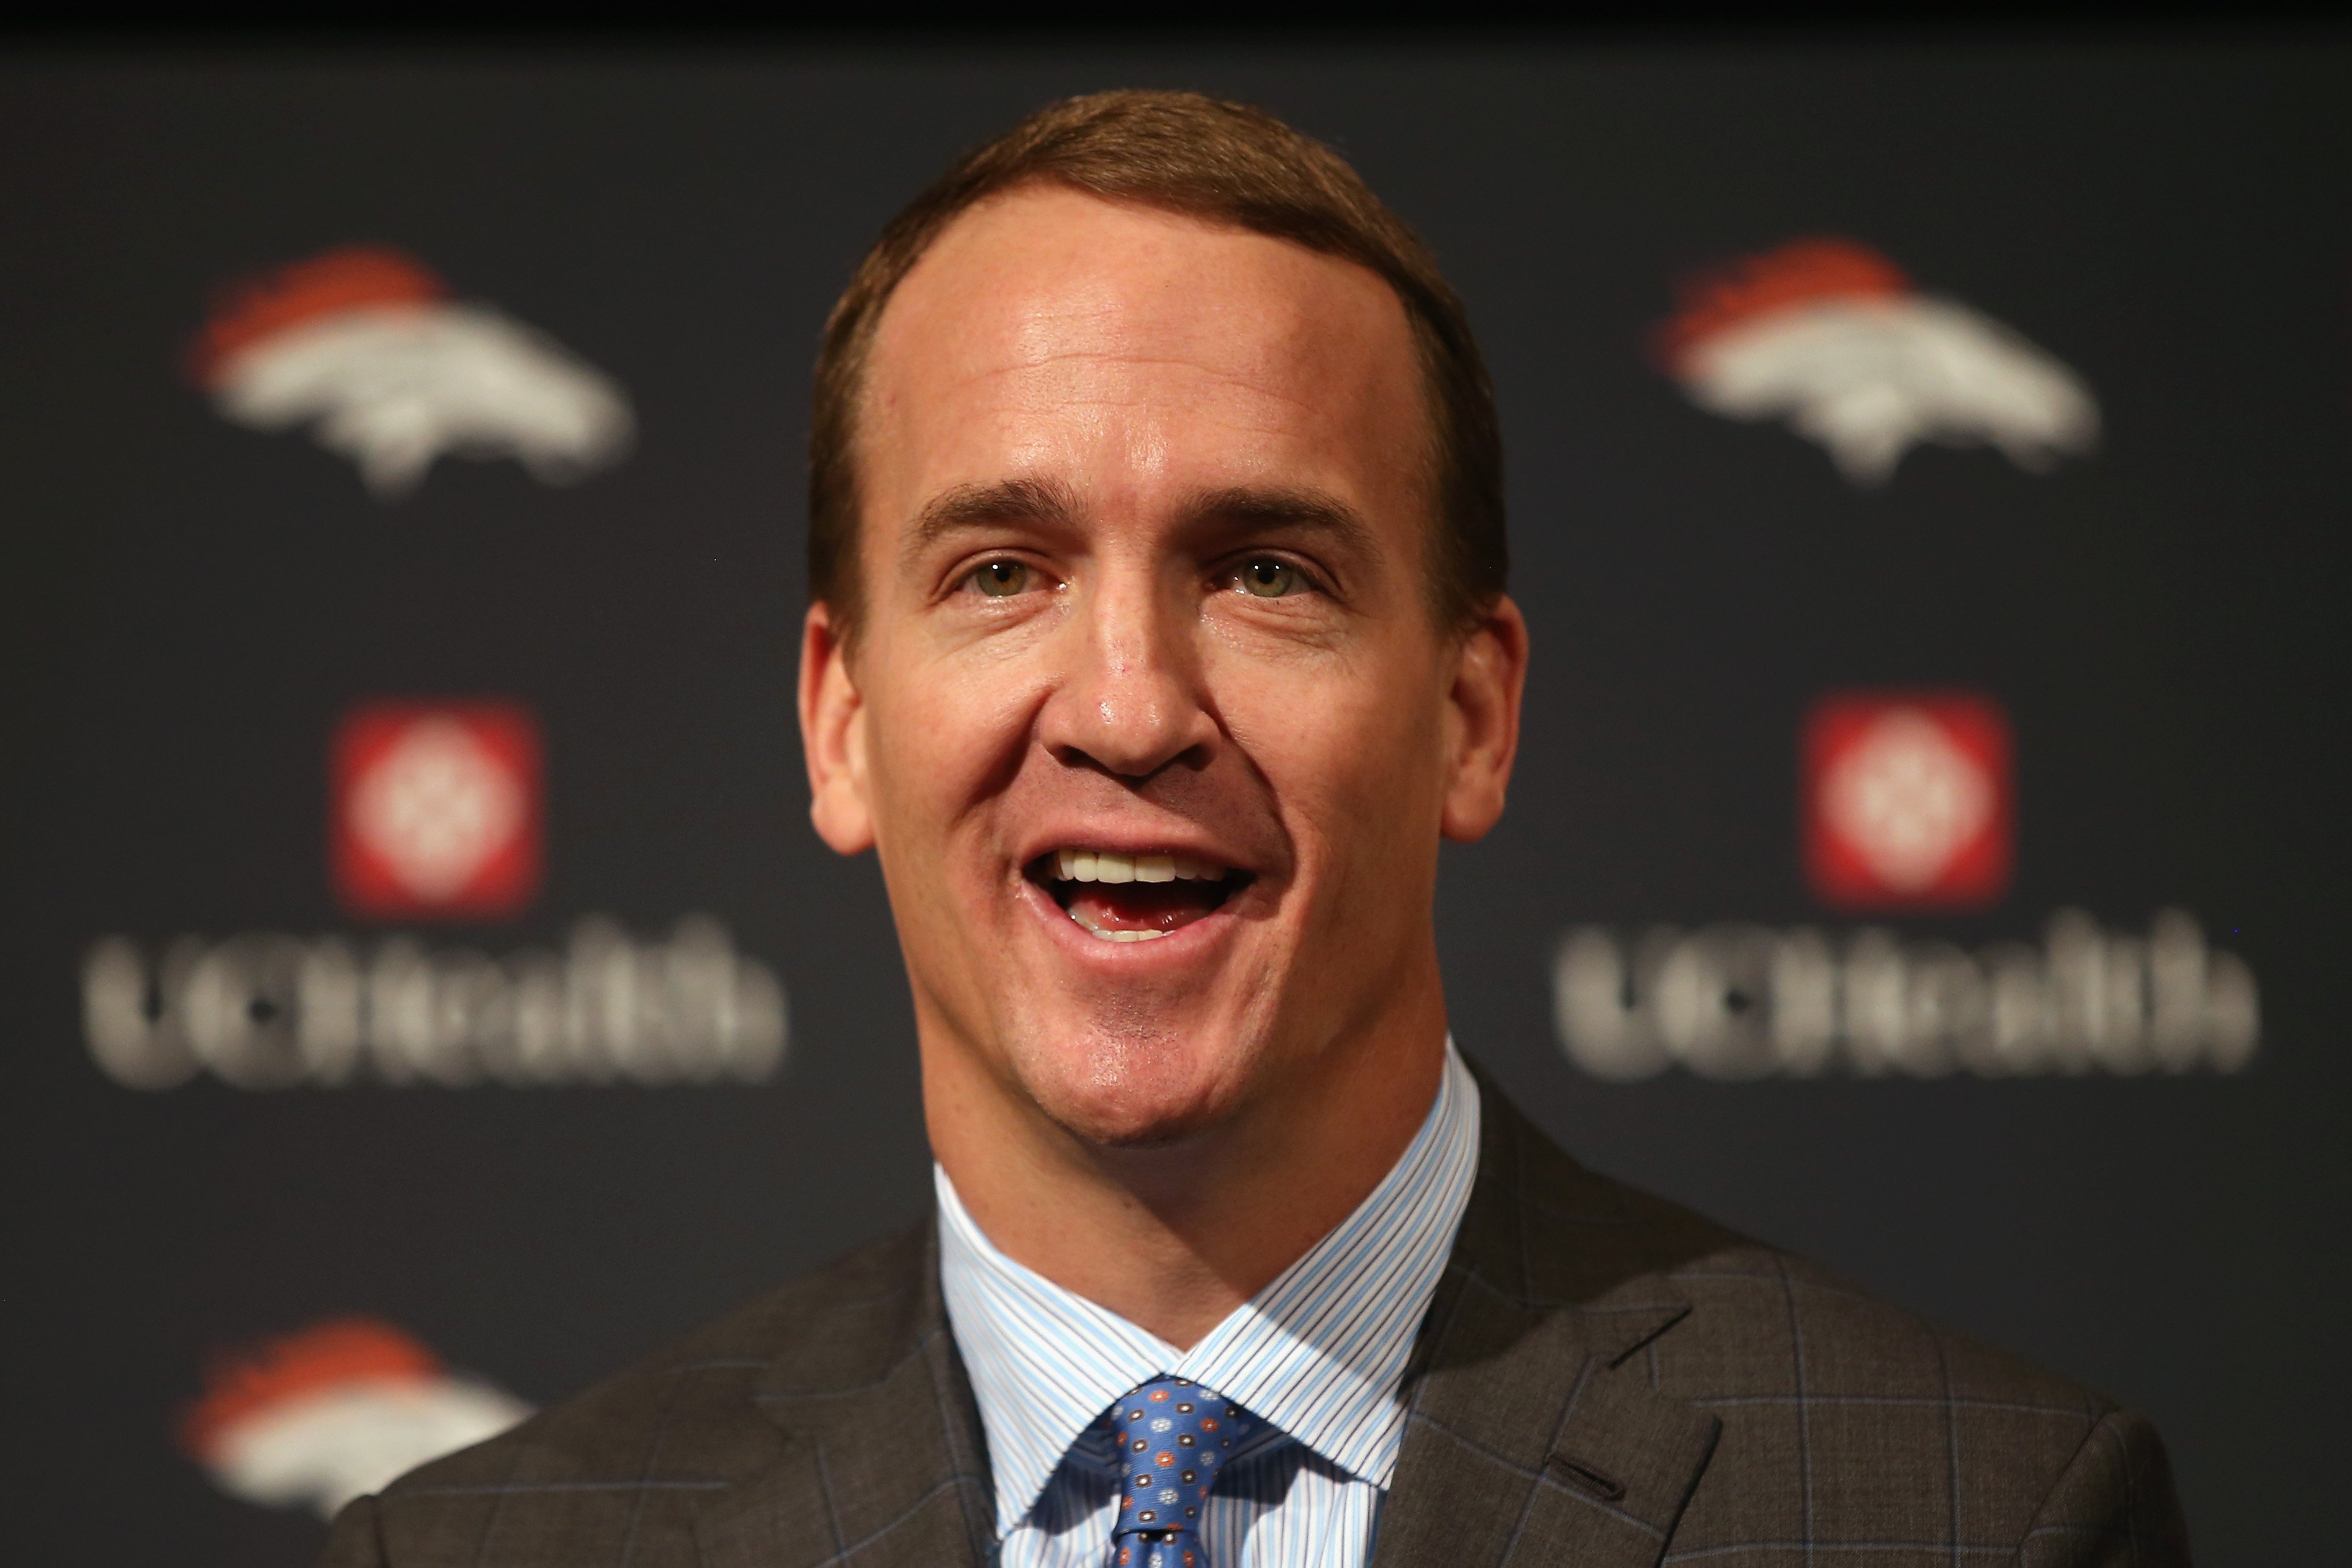 Photo of Peyton Manning as he announced his retirement from the NFL in Englewood on March 7, 2016 | Source: Getty Images